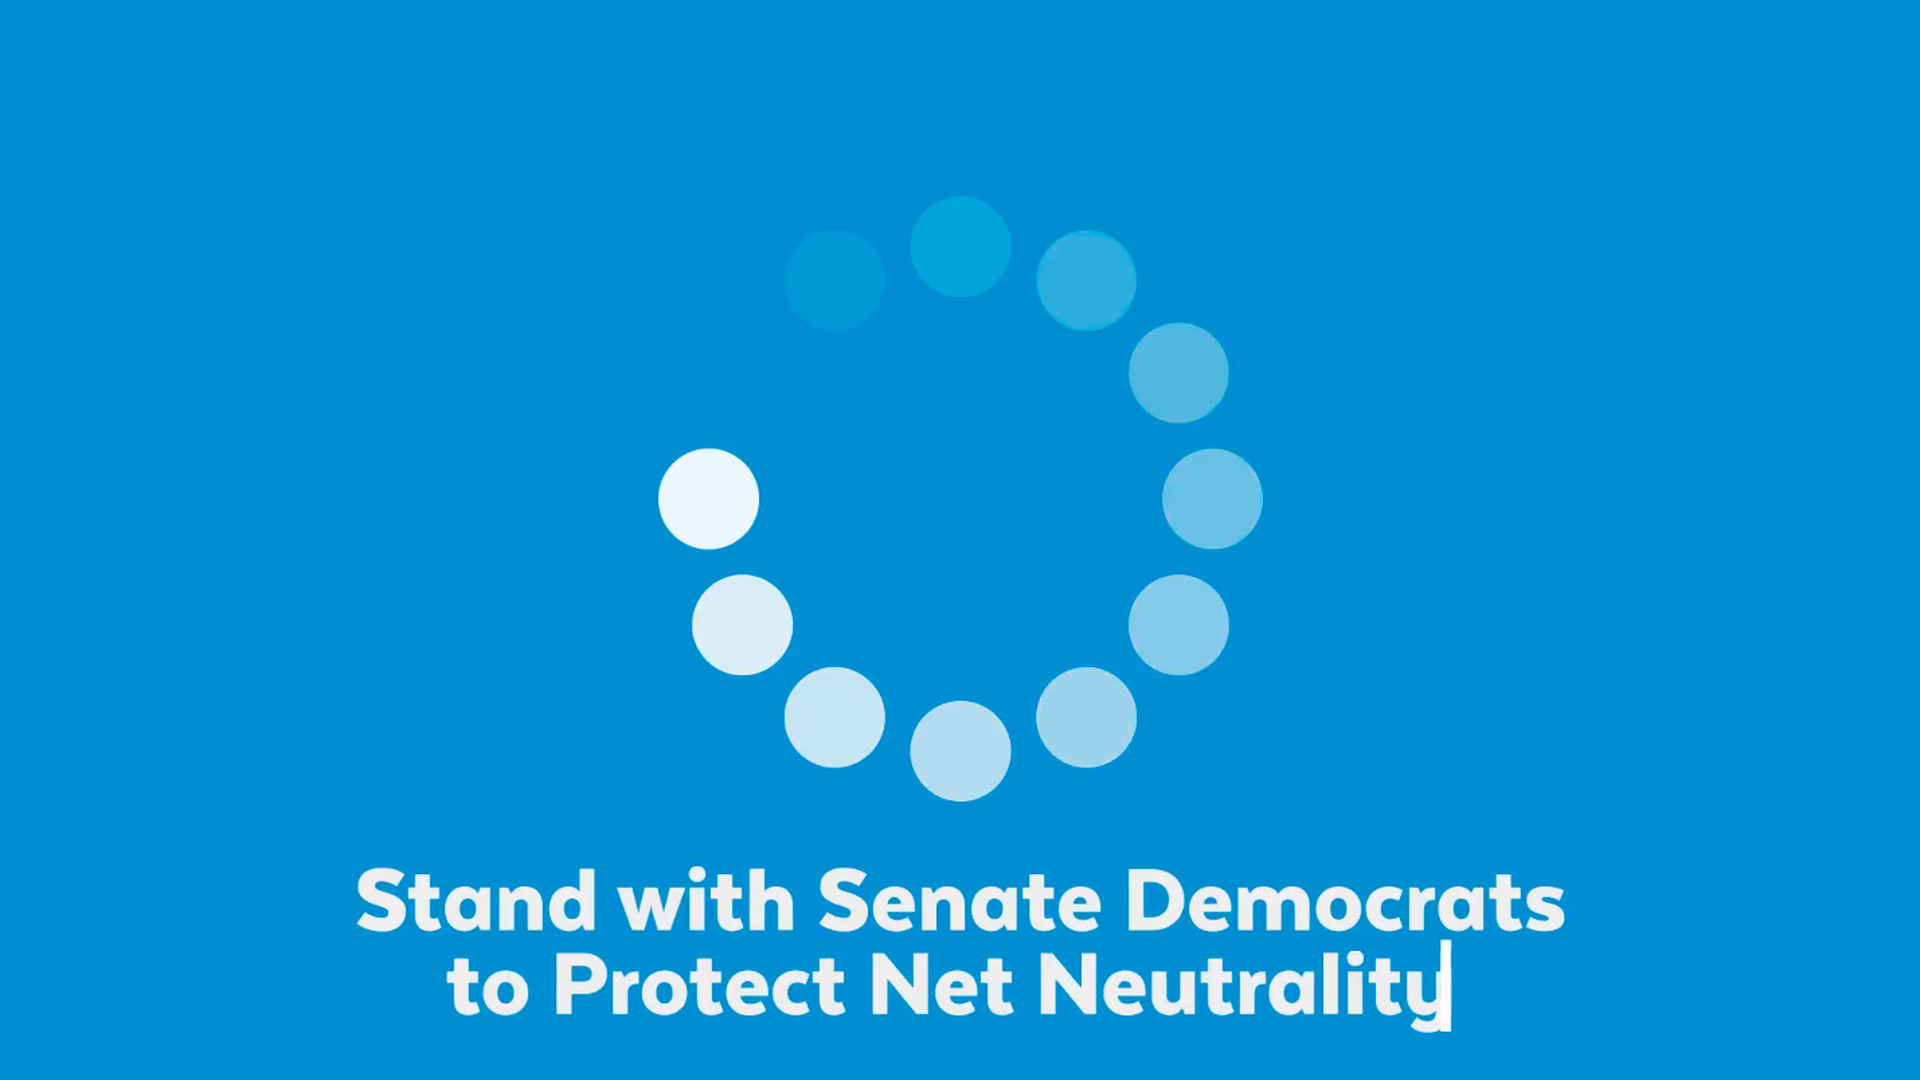 A screenshot of the ad says "Stand with Senate Democrats to protect net neutrality" below a loading symbol